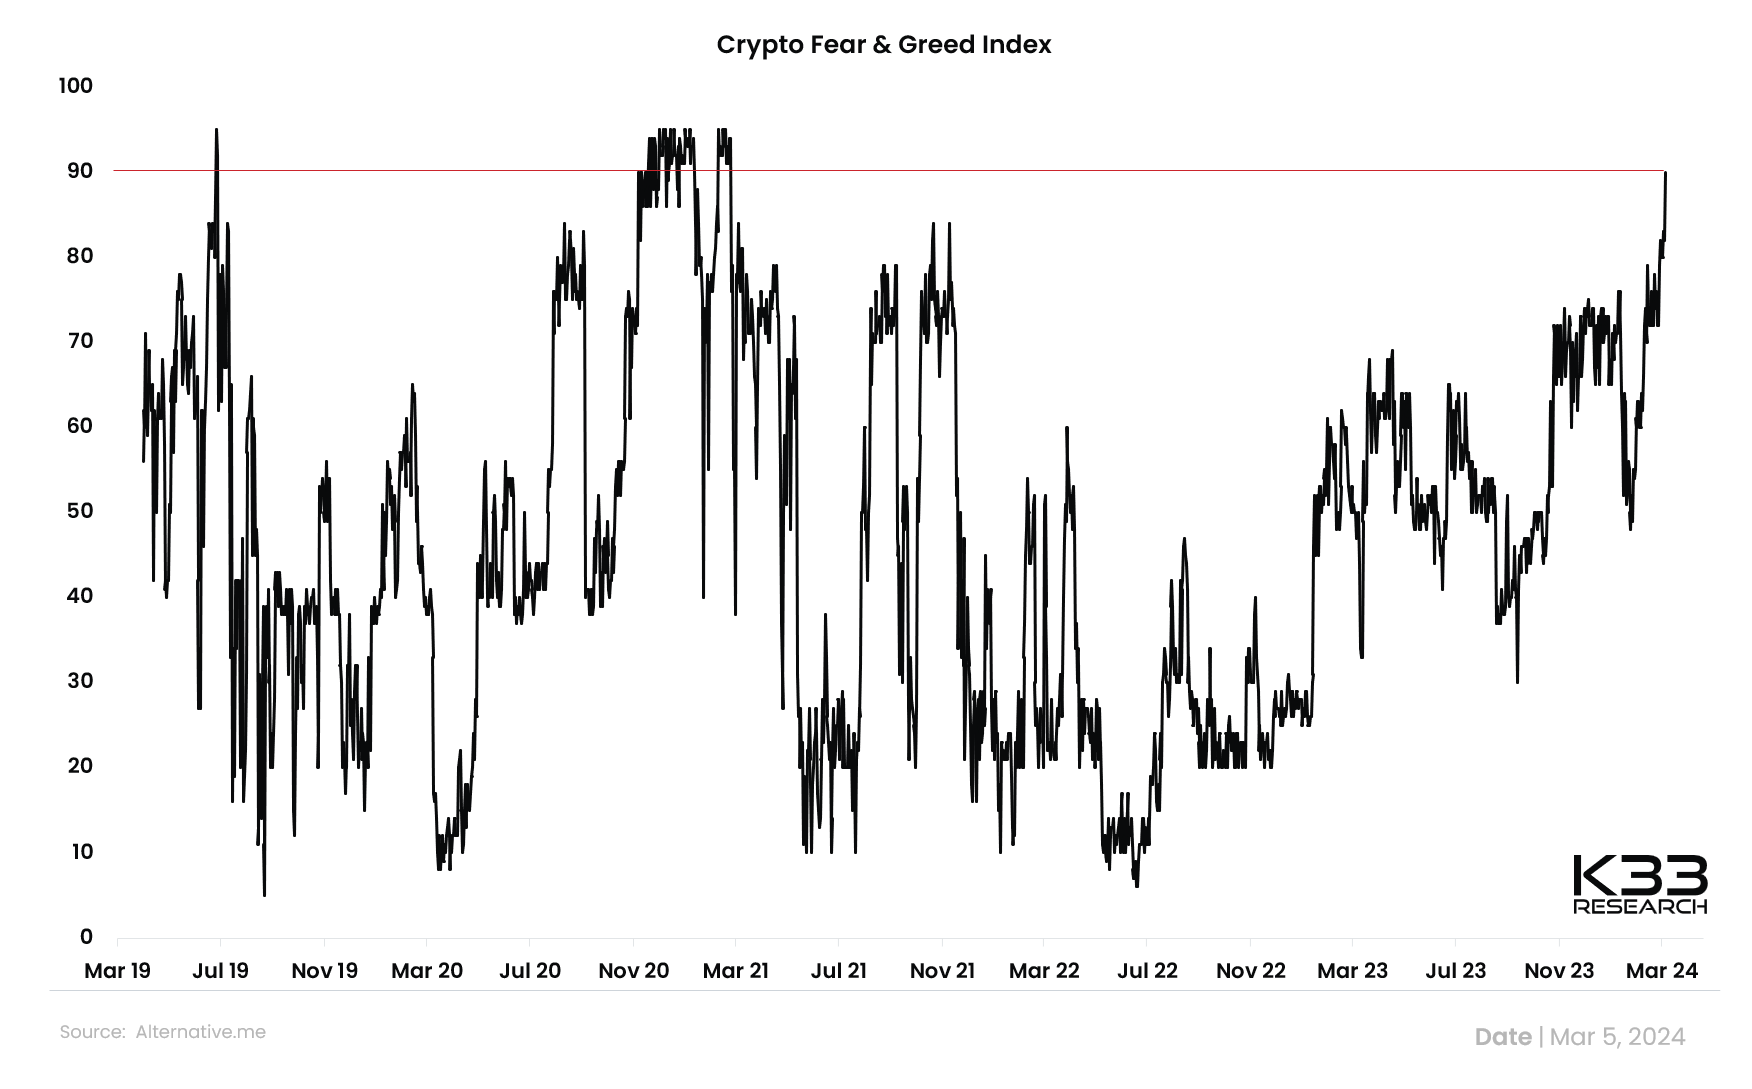 Crypto Fear and Greed Index: (Source: K33 Research)